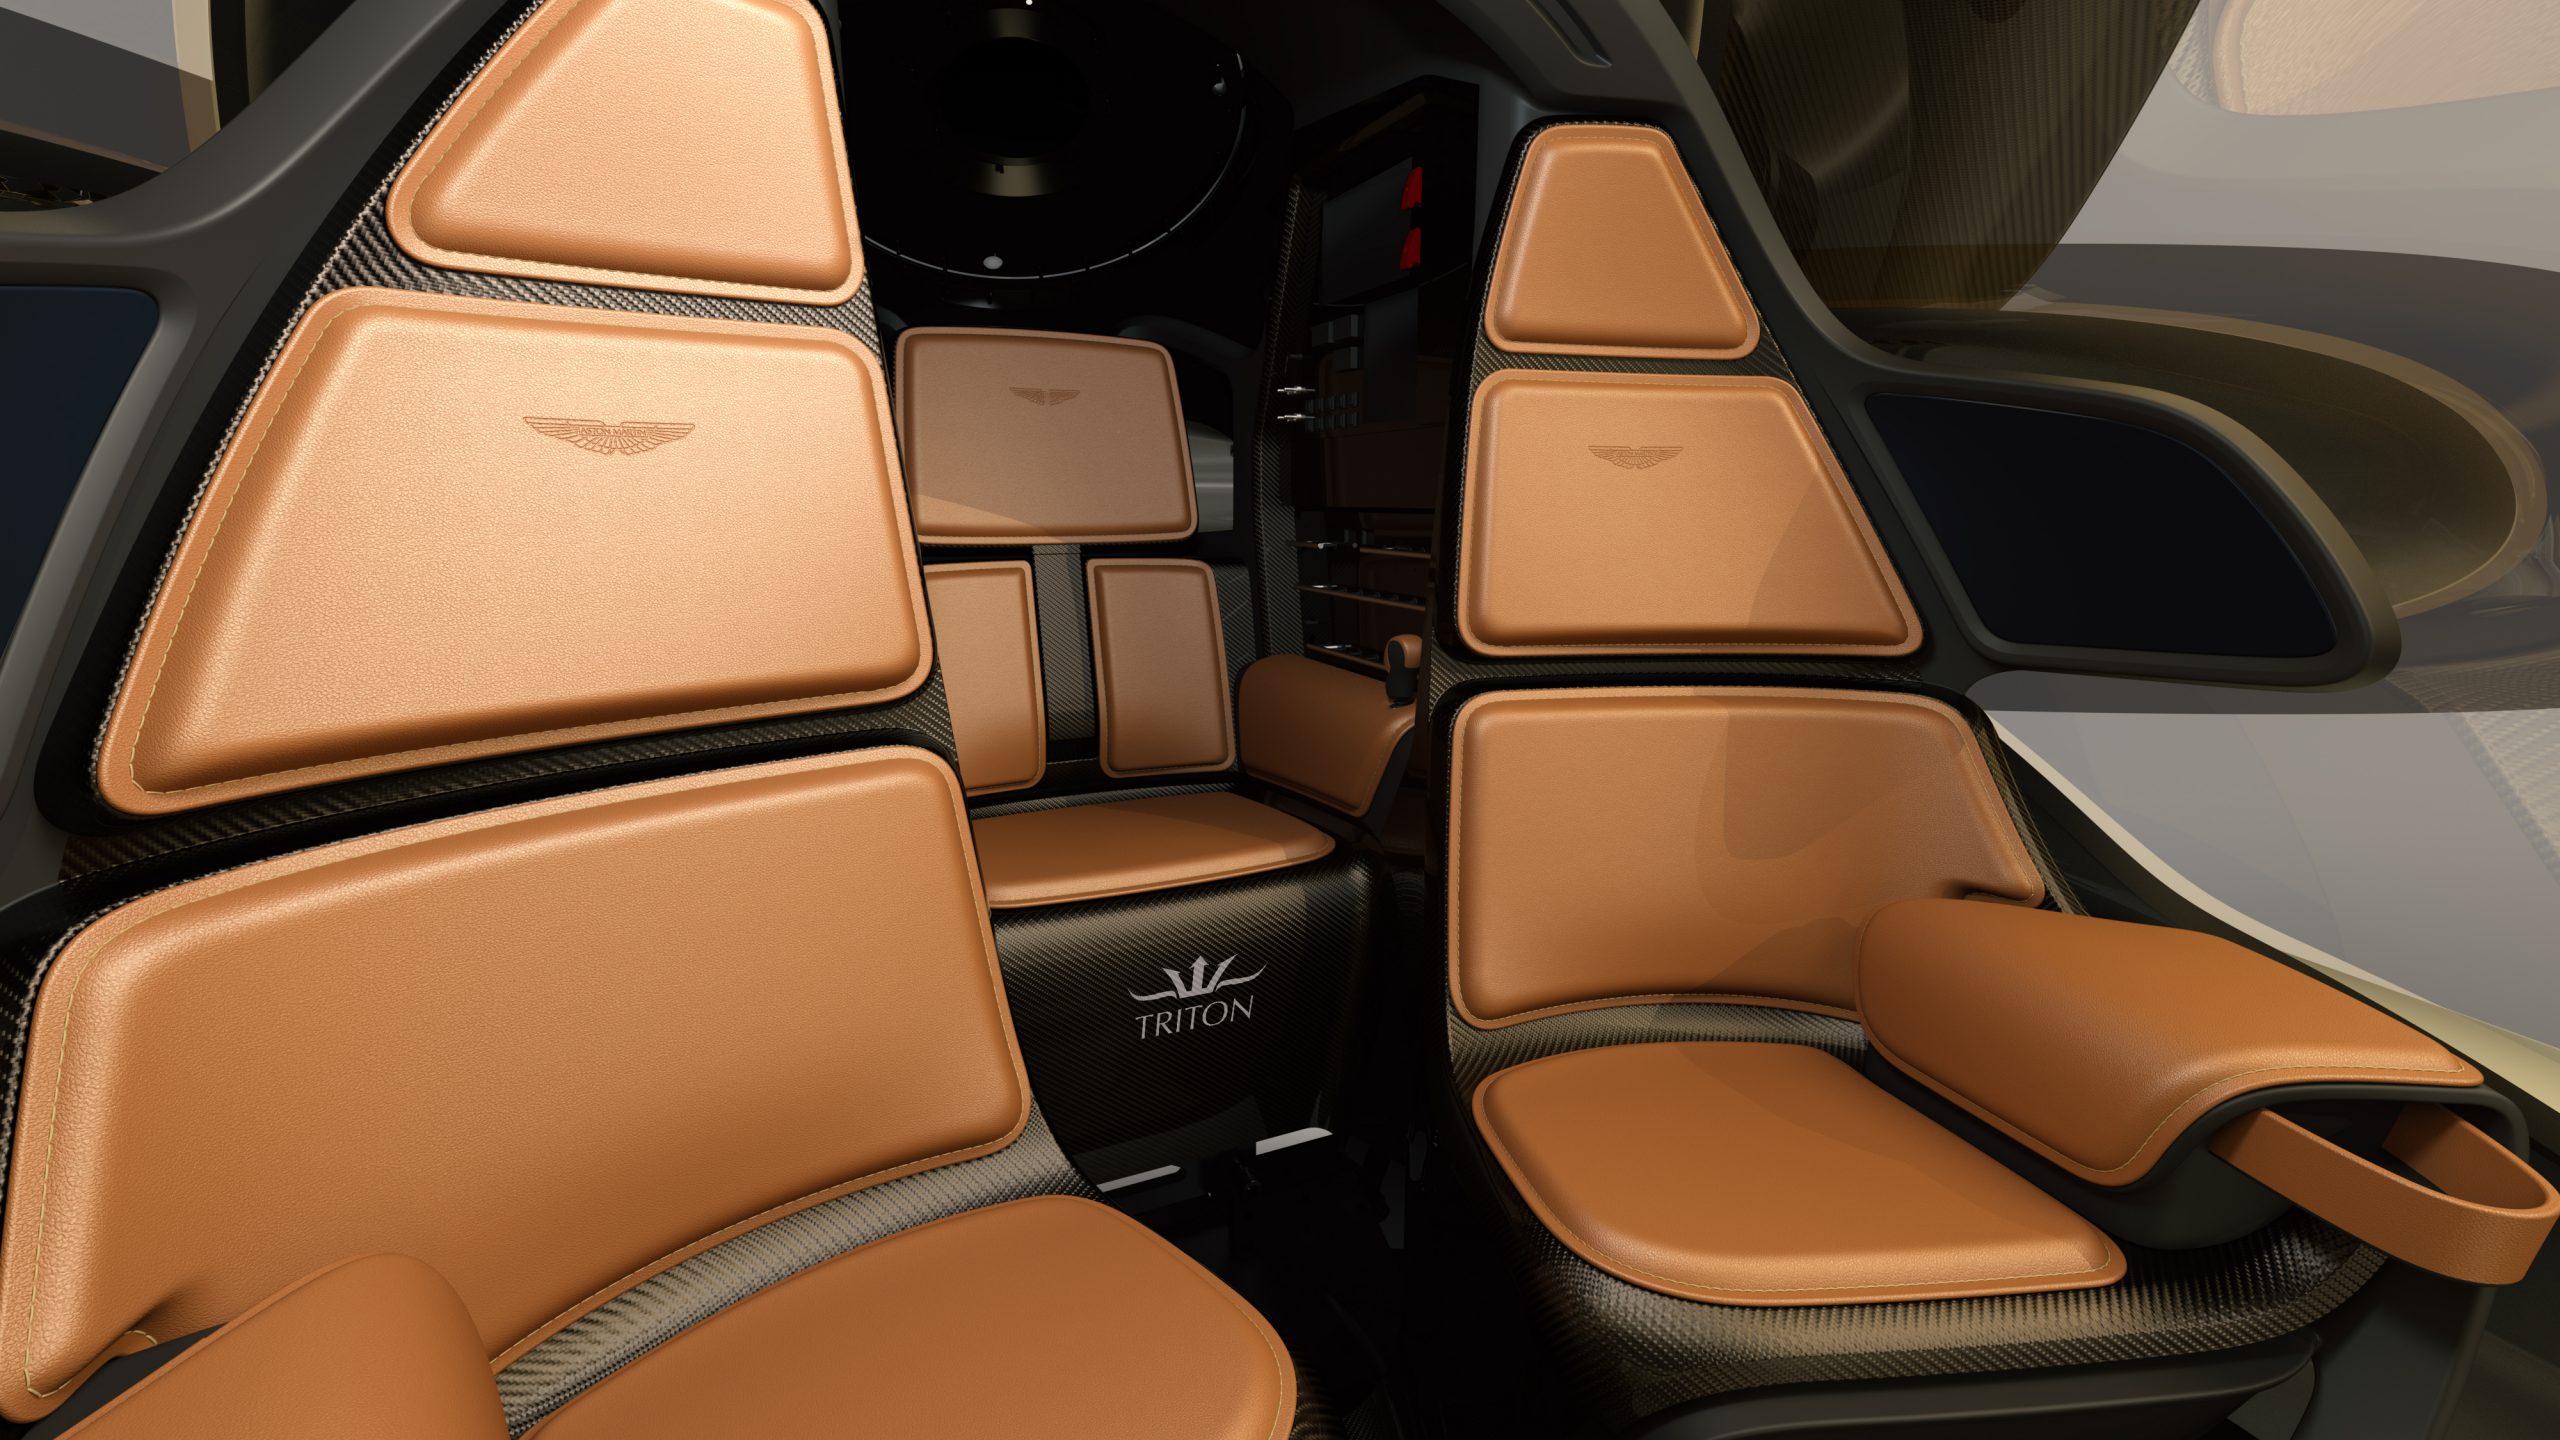 Triton’s luxurious interior clad in leather and carbon.